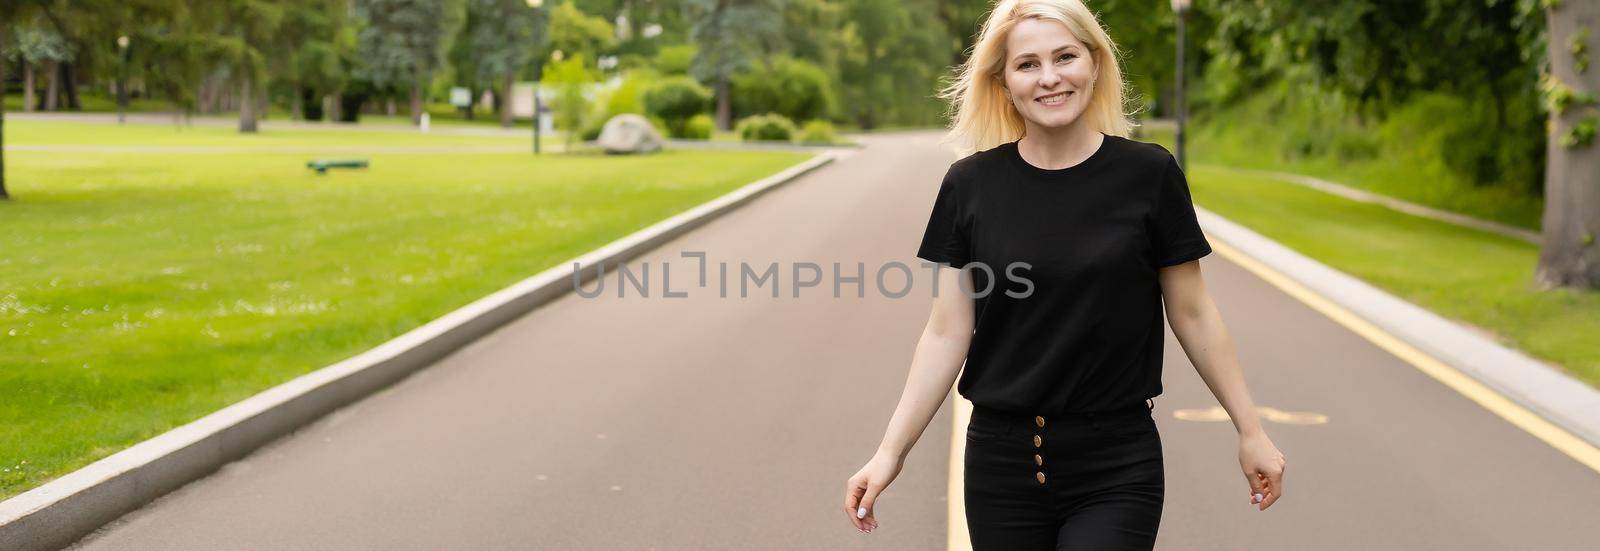 Joyful young lady in casual clothes walking along asphalt road in countryside, hitchhiking for ride outdoors. Lovely millennial woman traveling alone by autostop by Andelov13